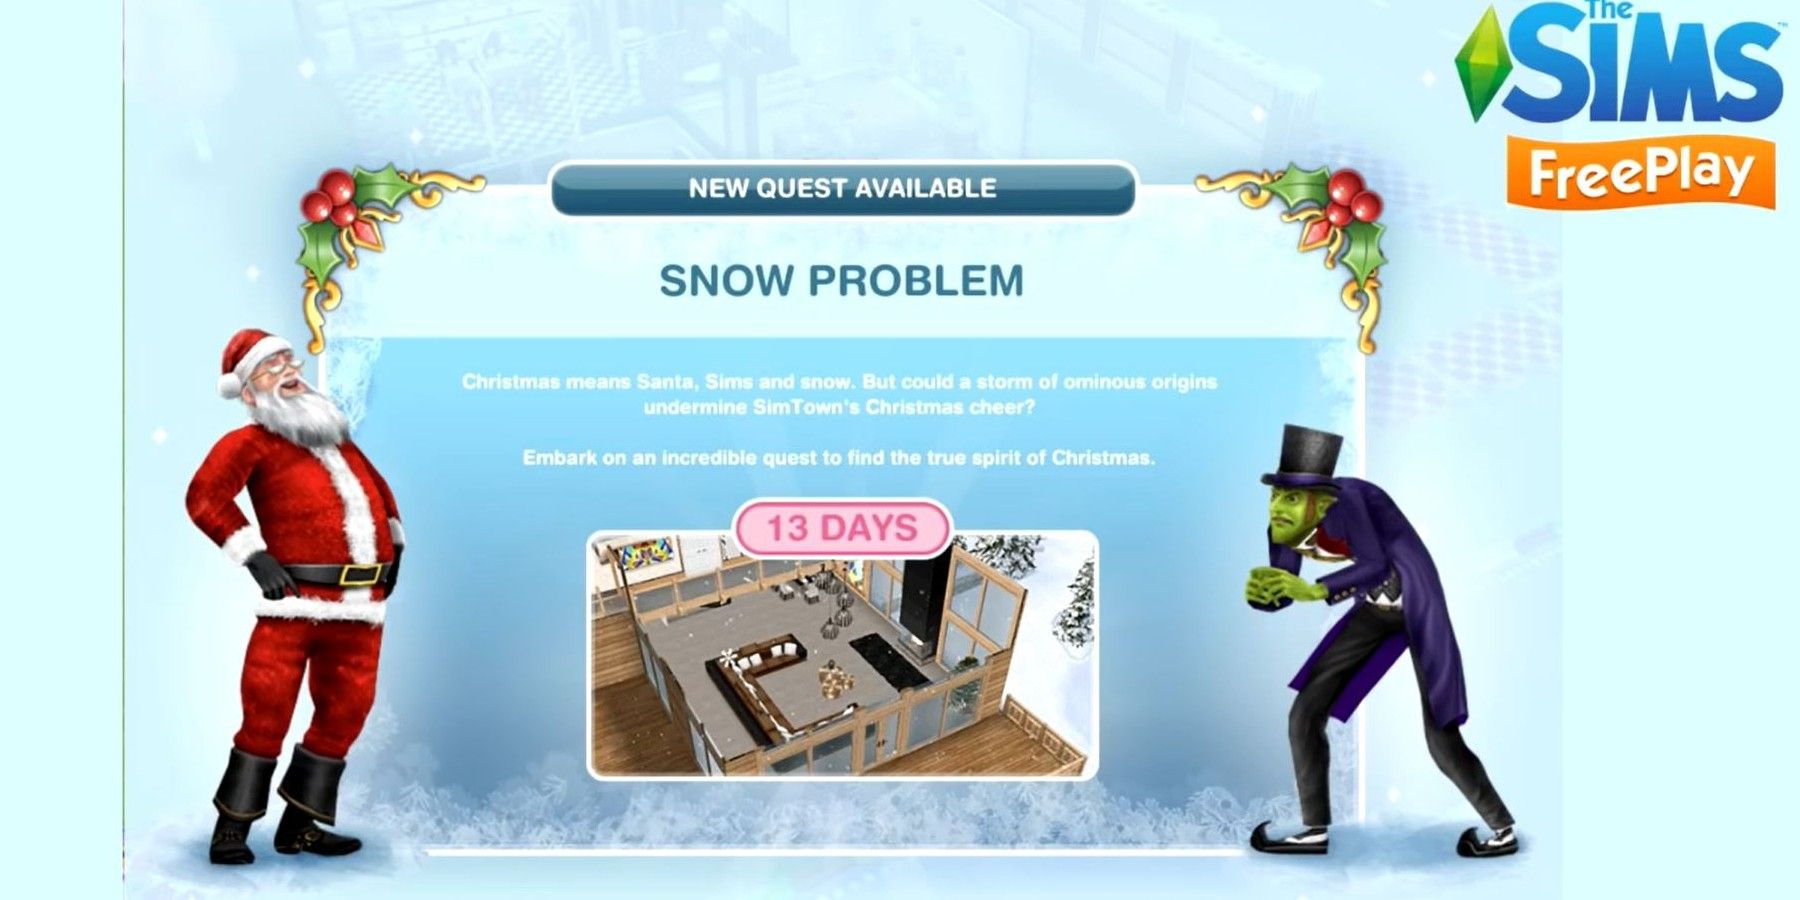 Sims Freeplay Snow Problem Quest Explained